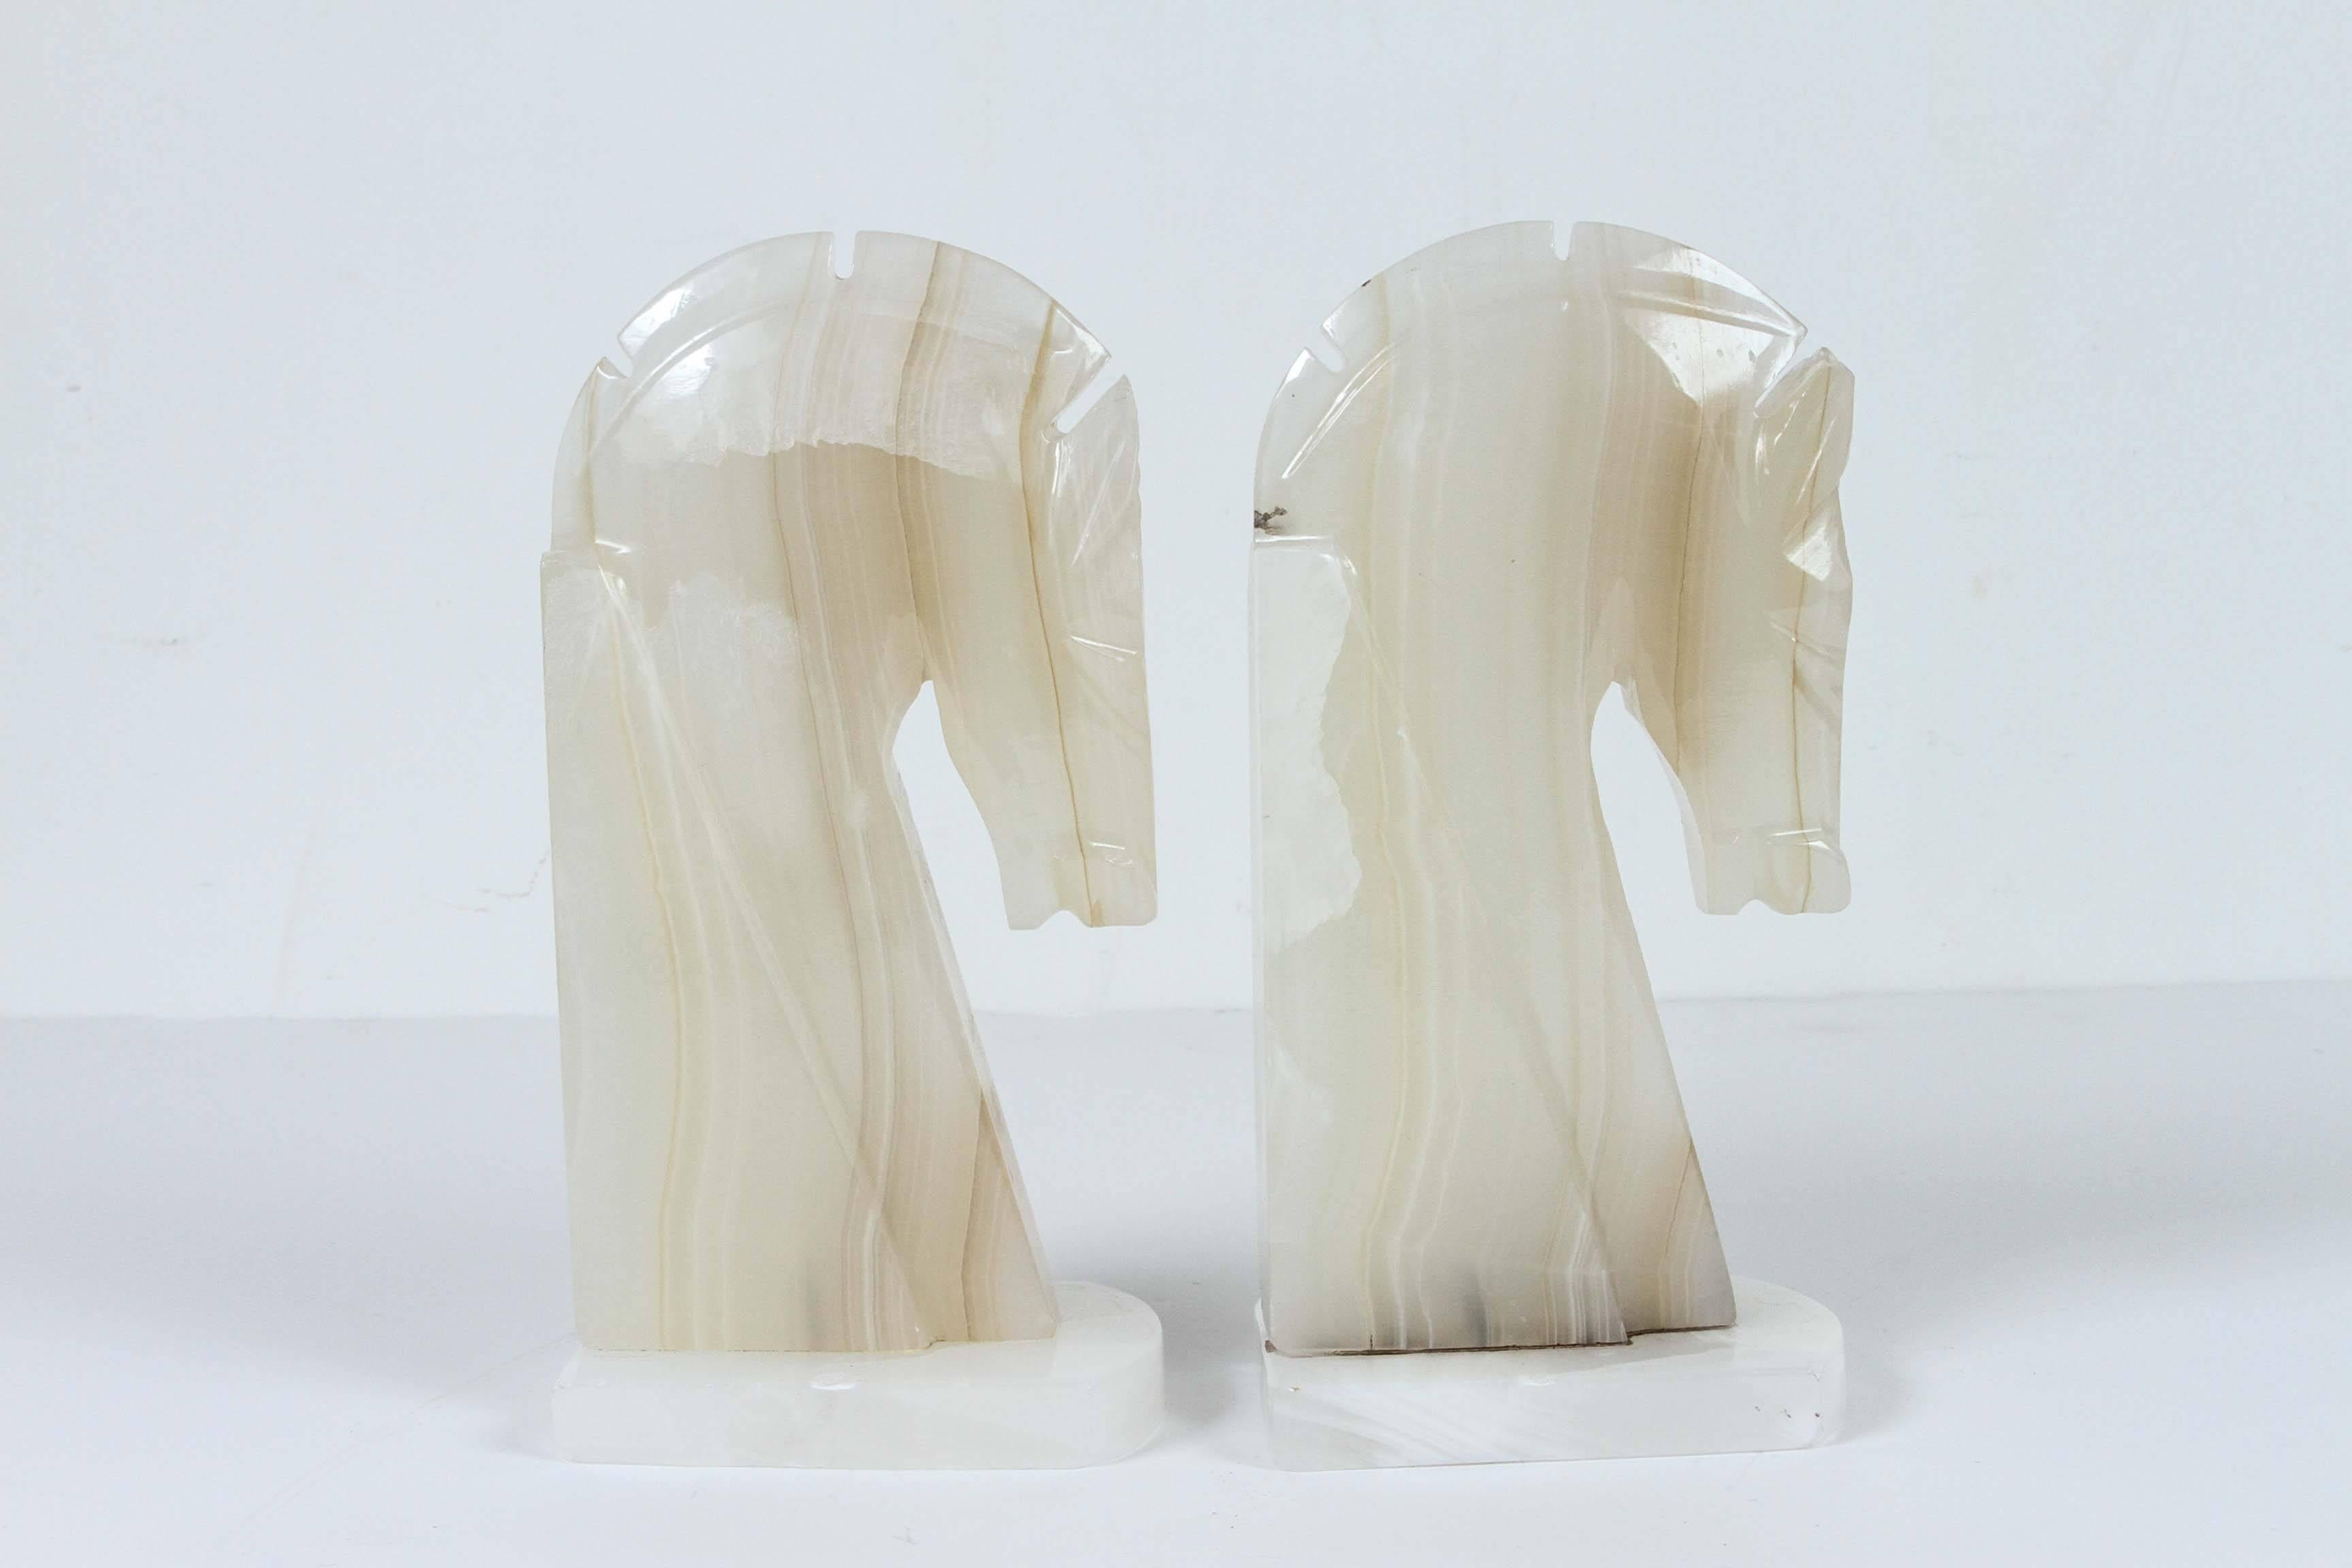 Hand-Carved Pair of Art Deco Style Horses Bookends